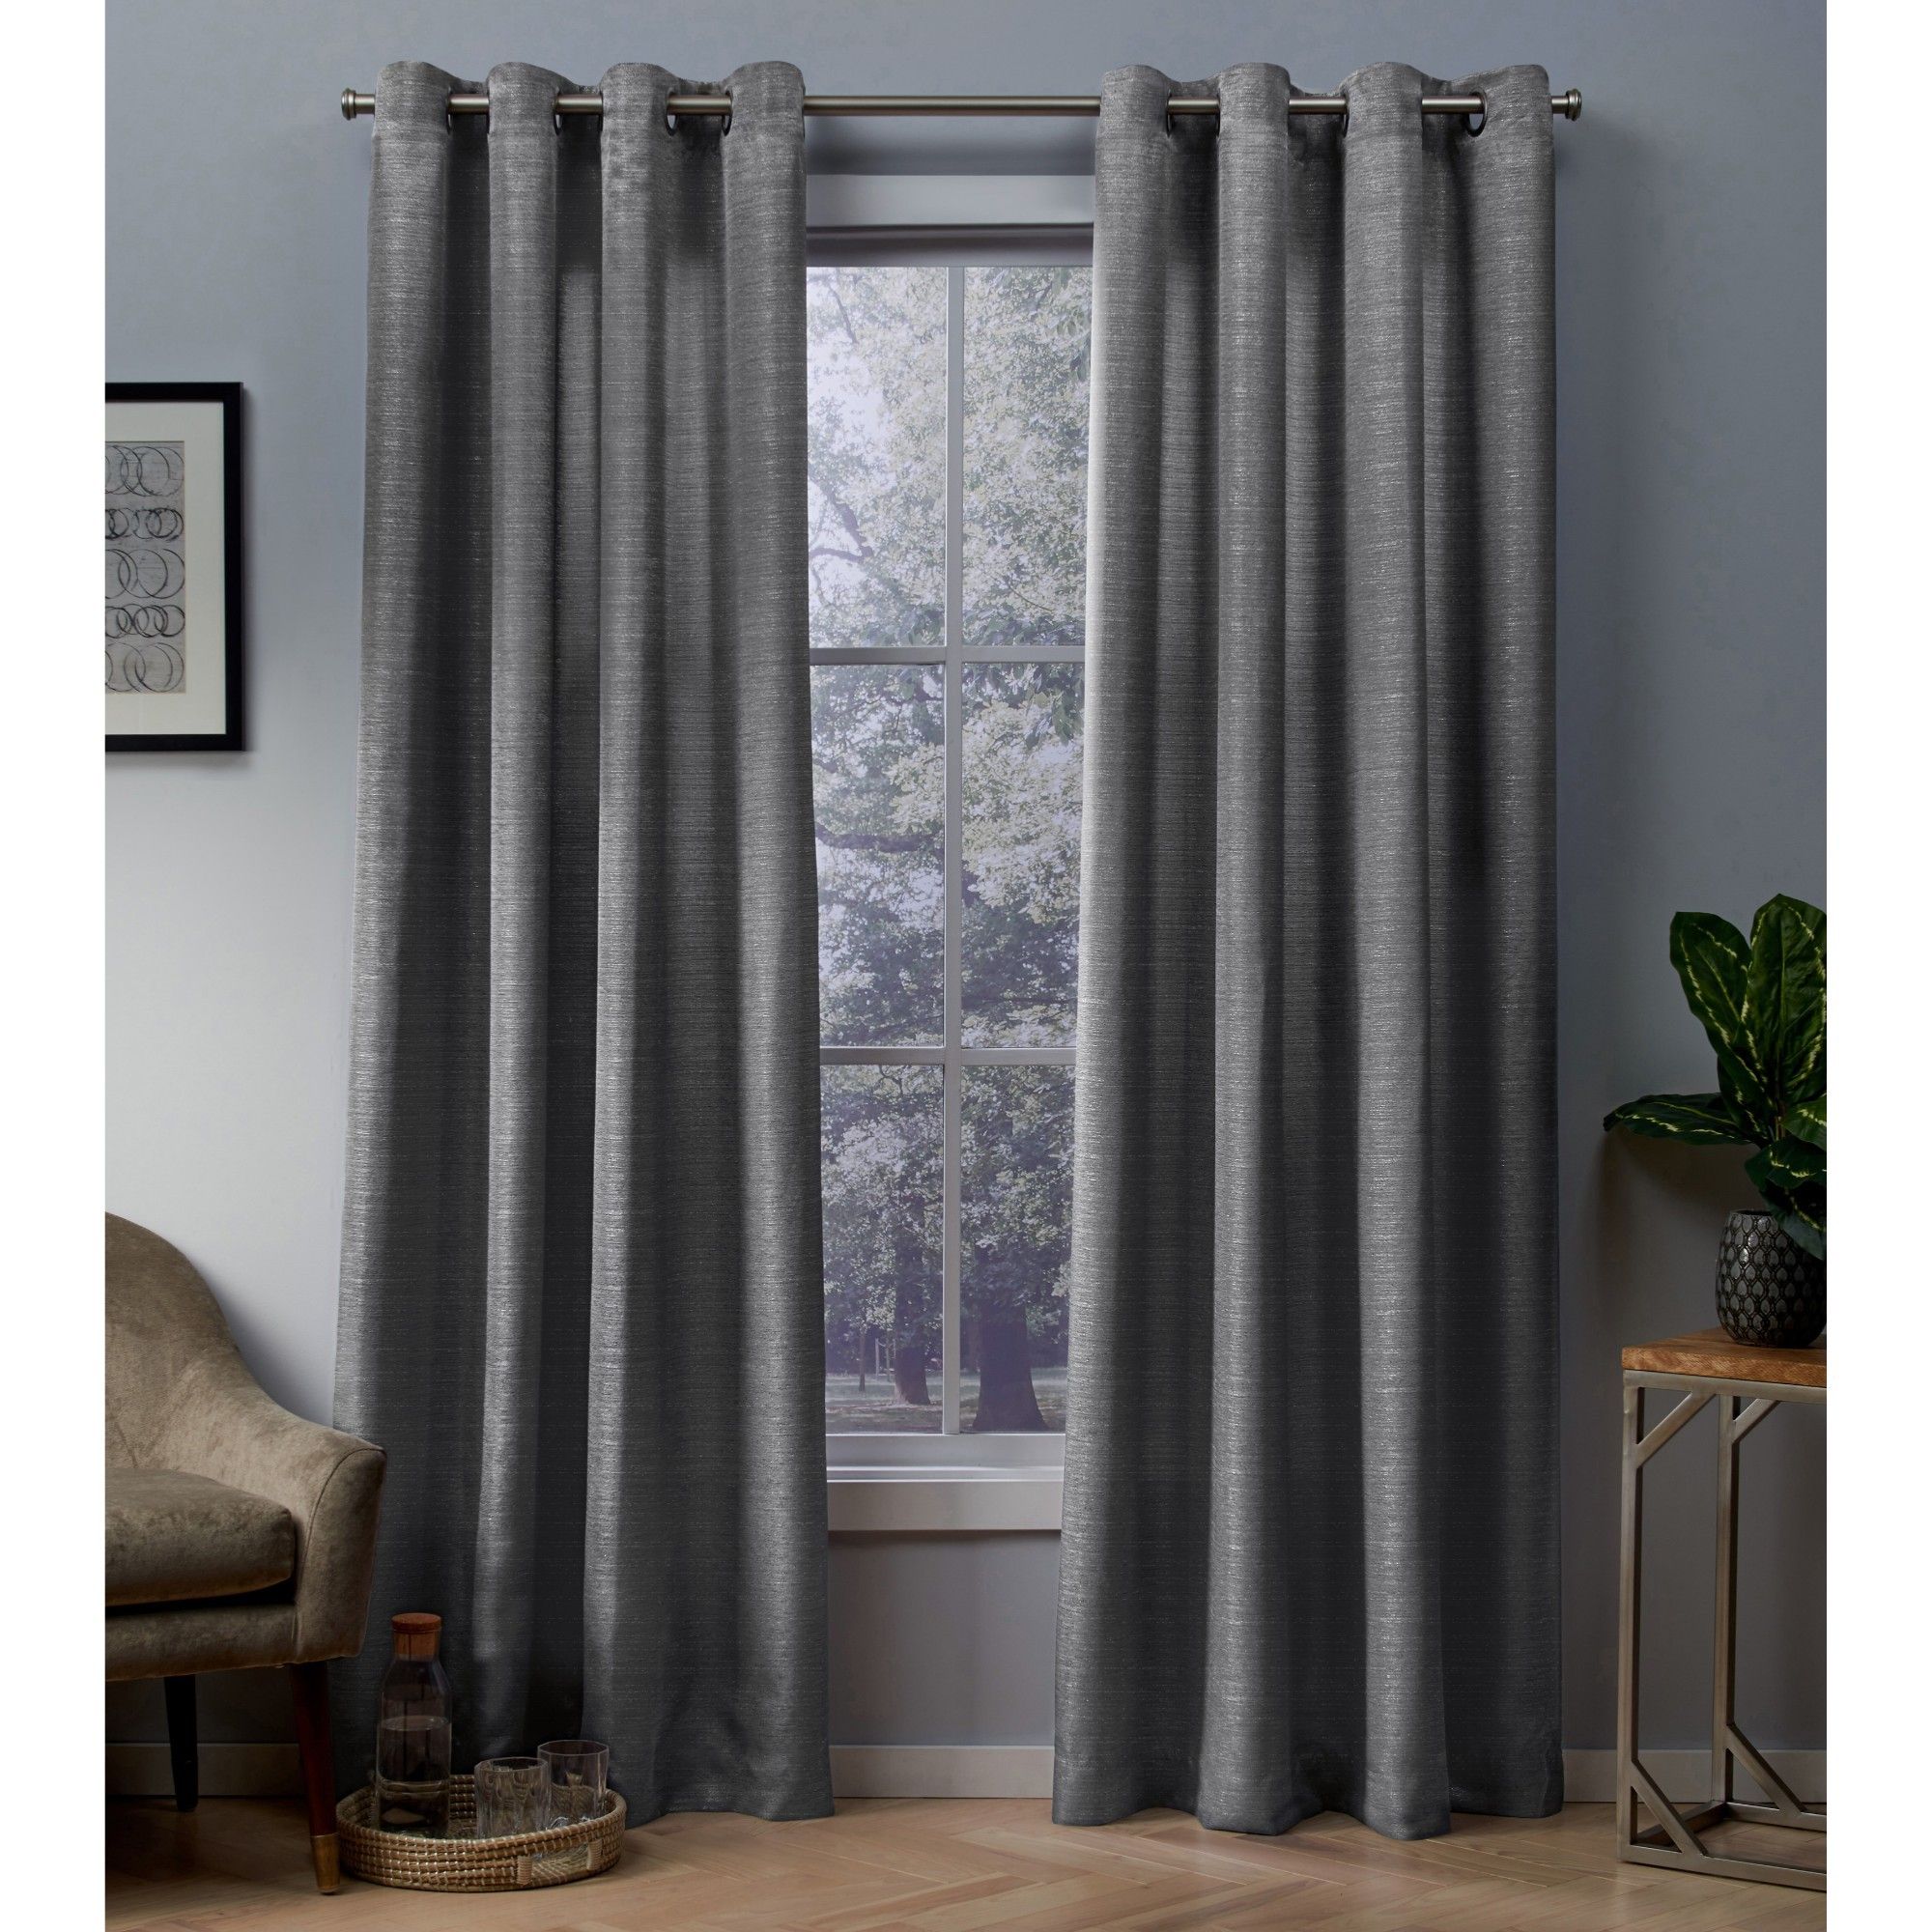 Jcpenney Fireplace Awesome Whitby Curtain Panels Black Pearl 54×108 Exclusive Home